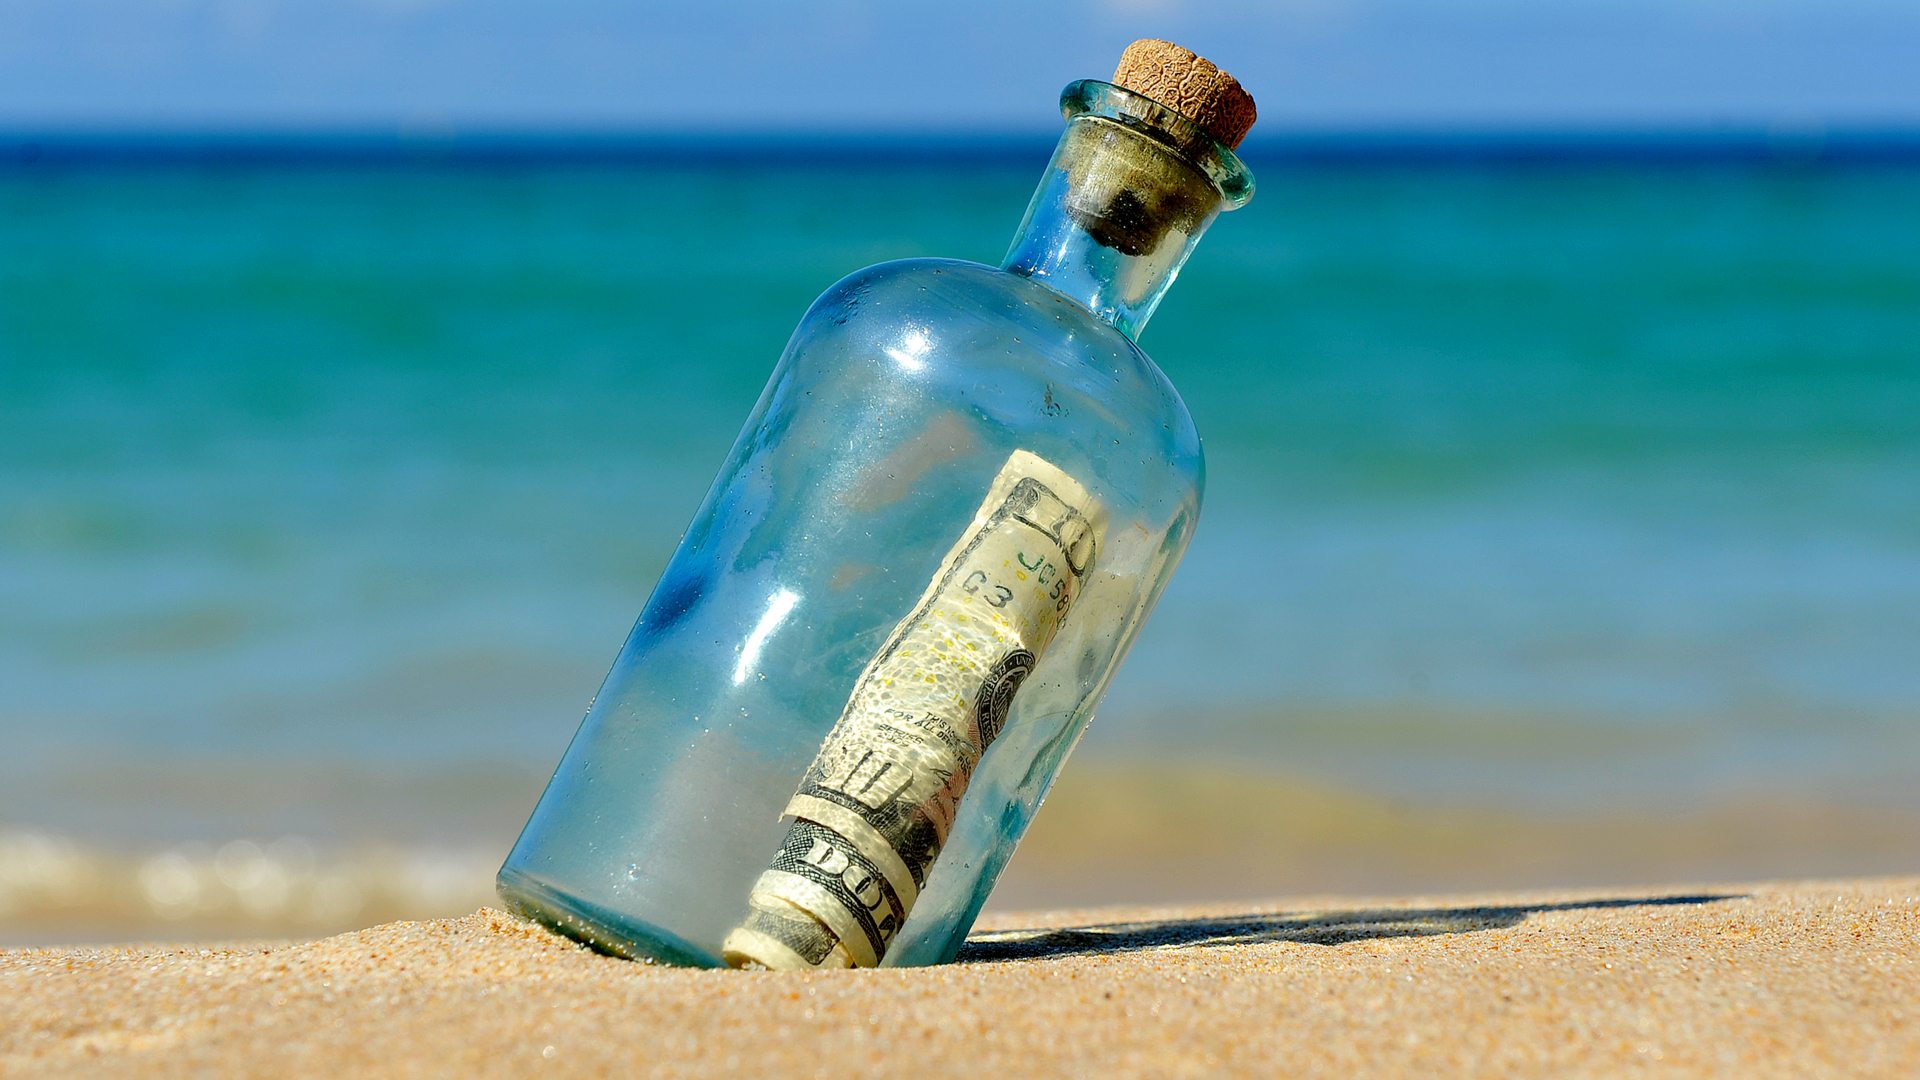 An image of a bottle with a banknote inside on the shore. Benefits of offshore banking